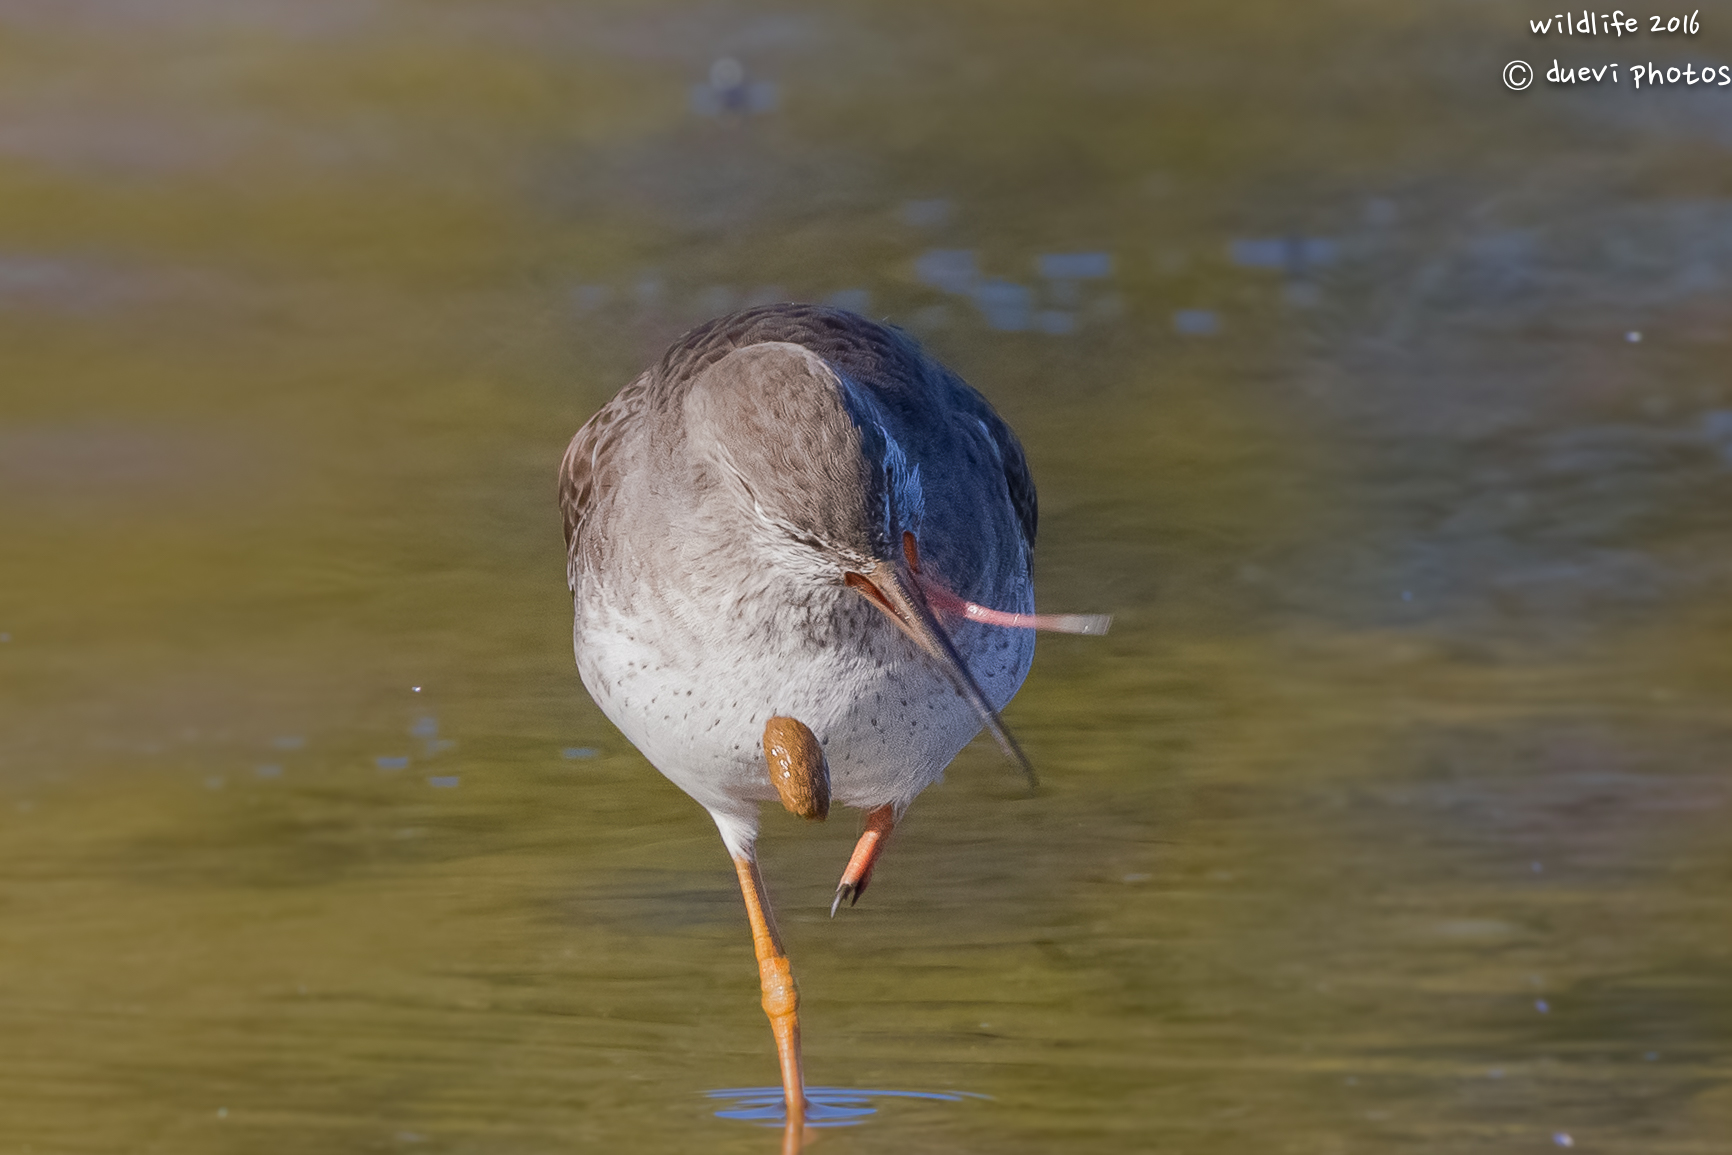 Redshank. The expulsion of the wad...